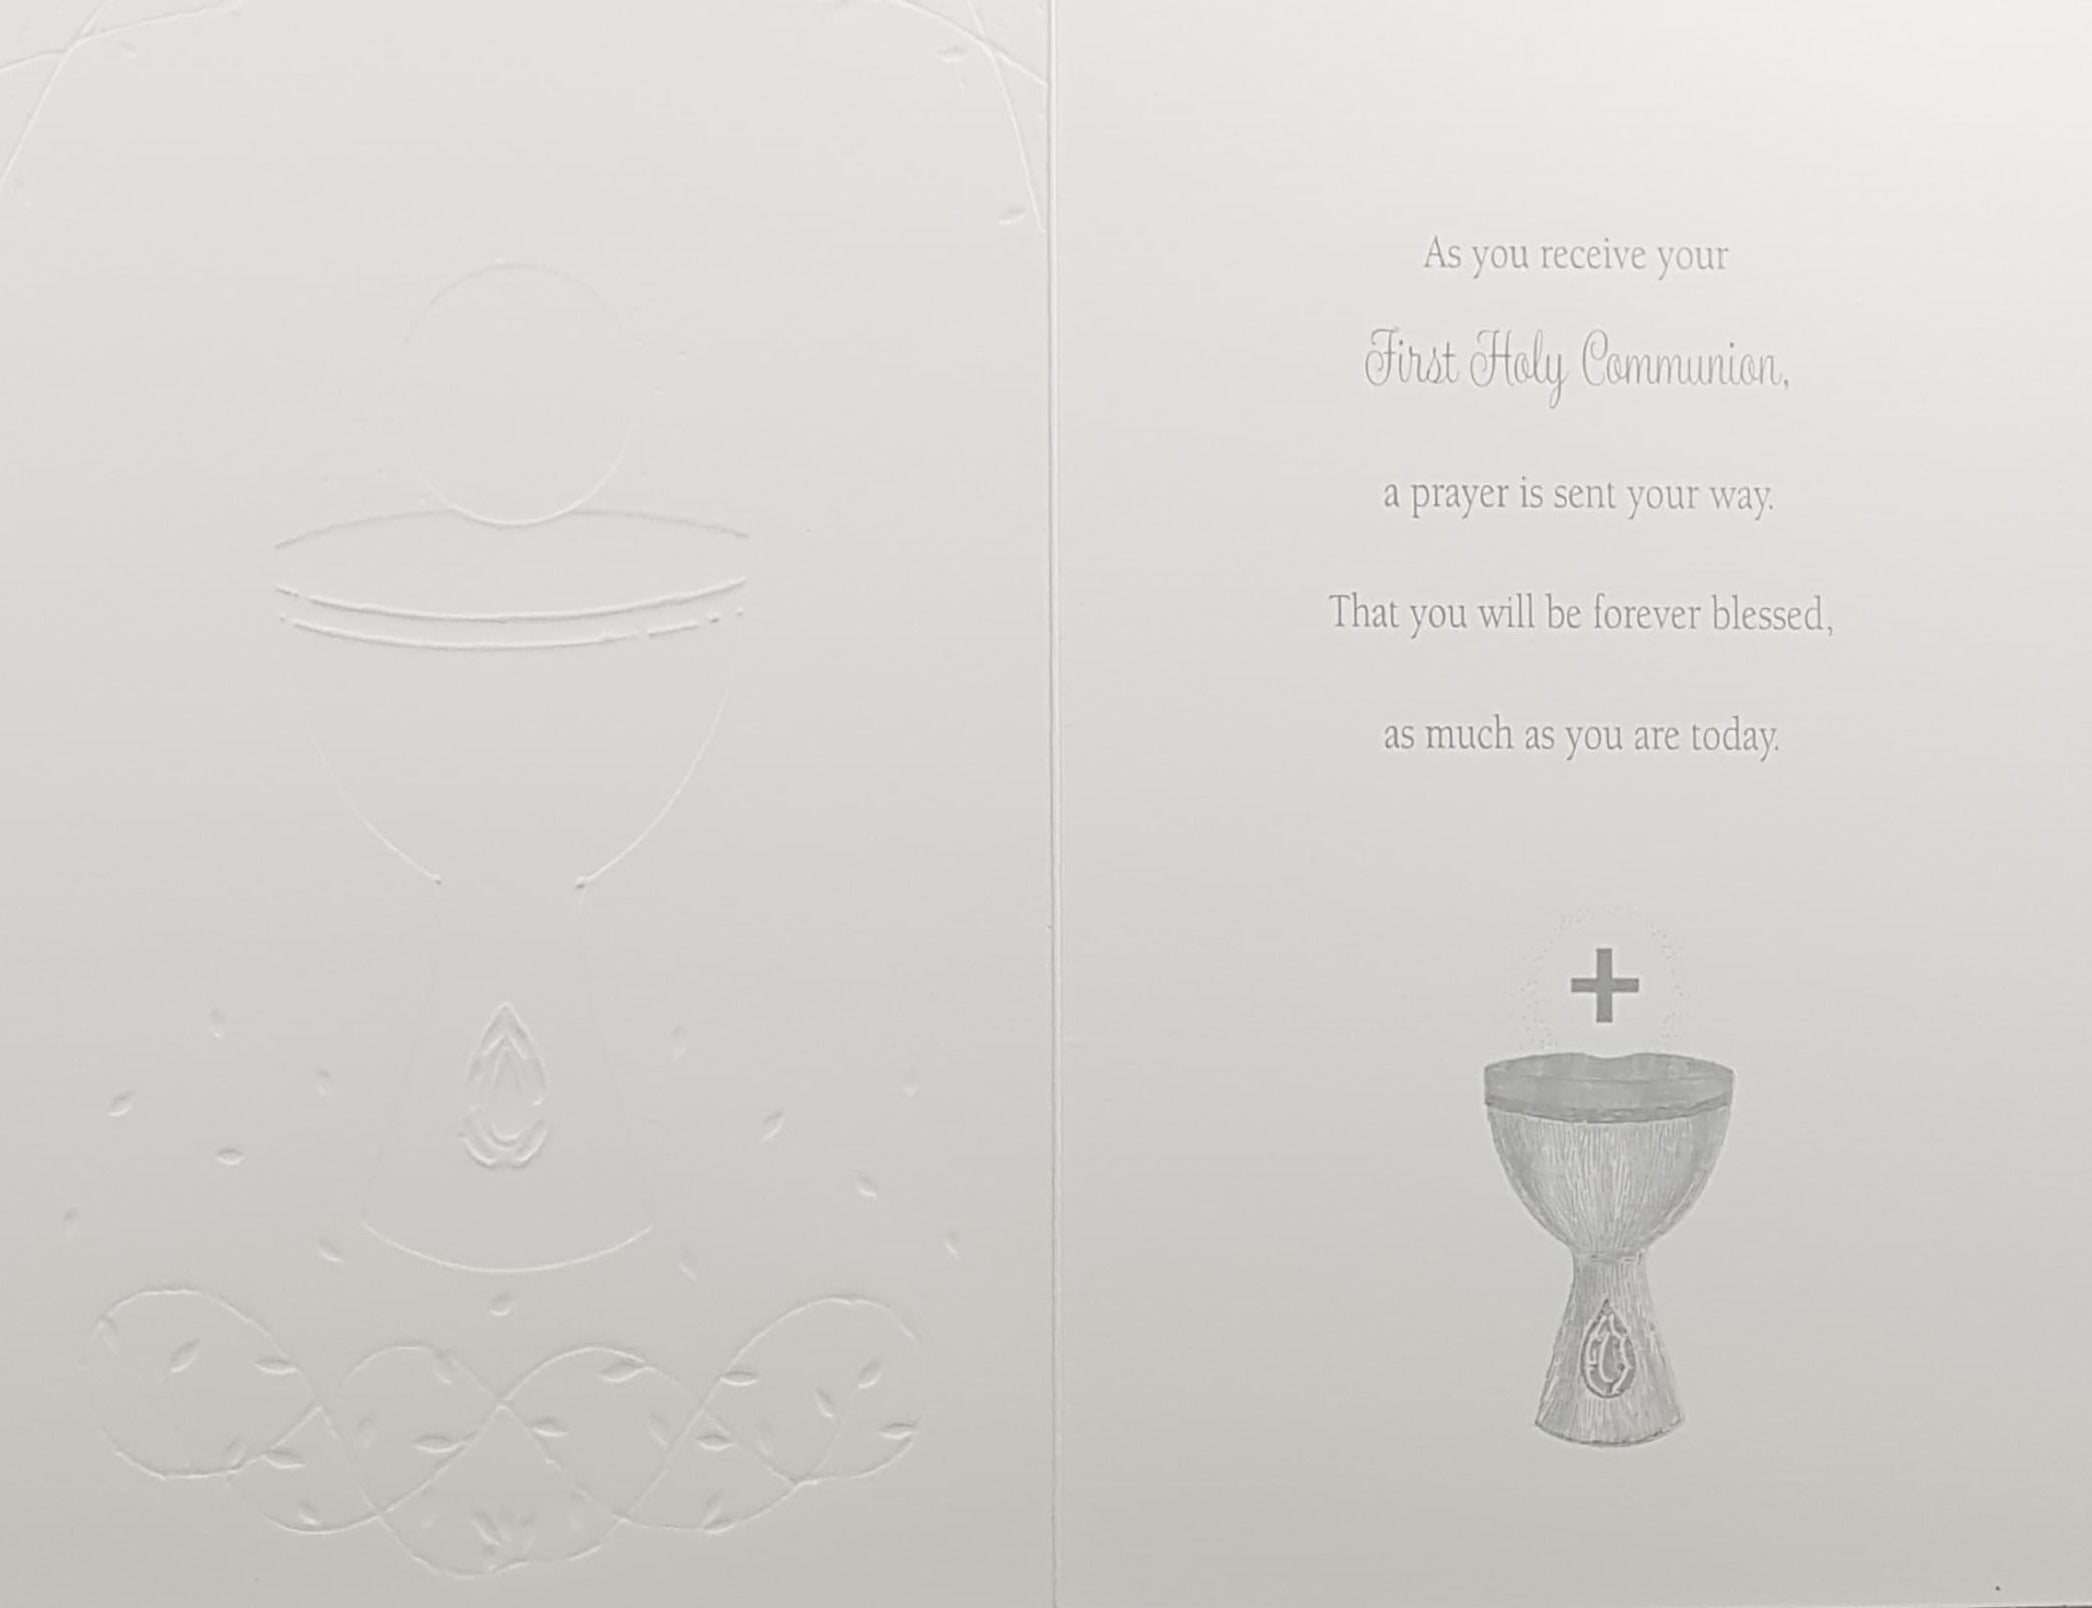 Communion Card - A Prayer For A Special Boy's First Communion Day